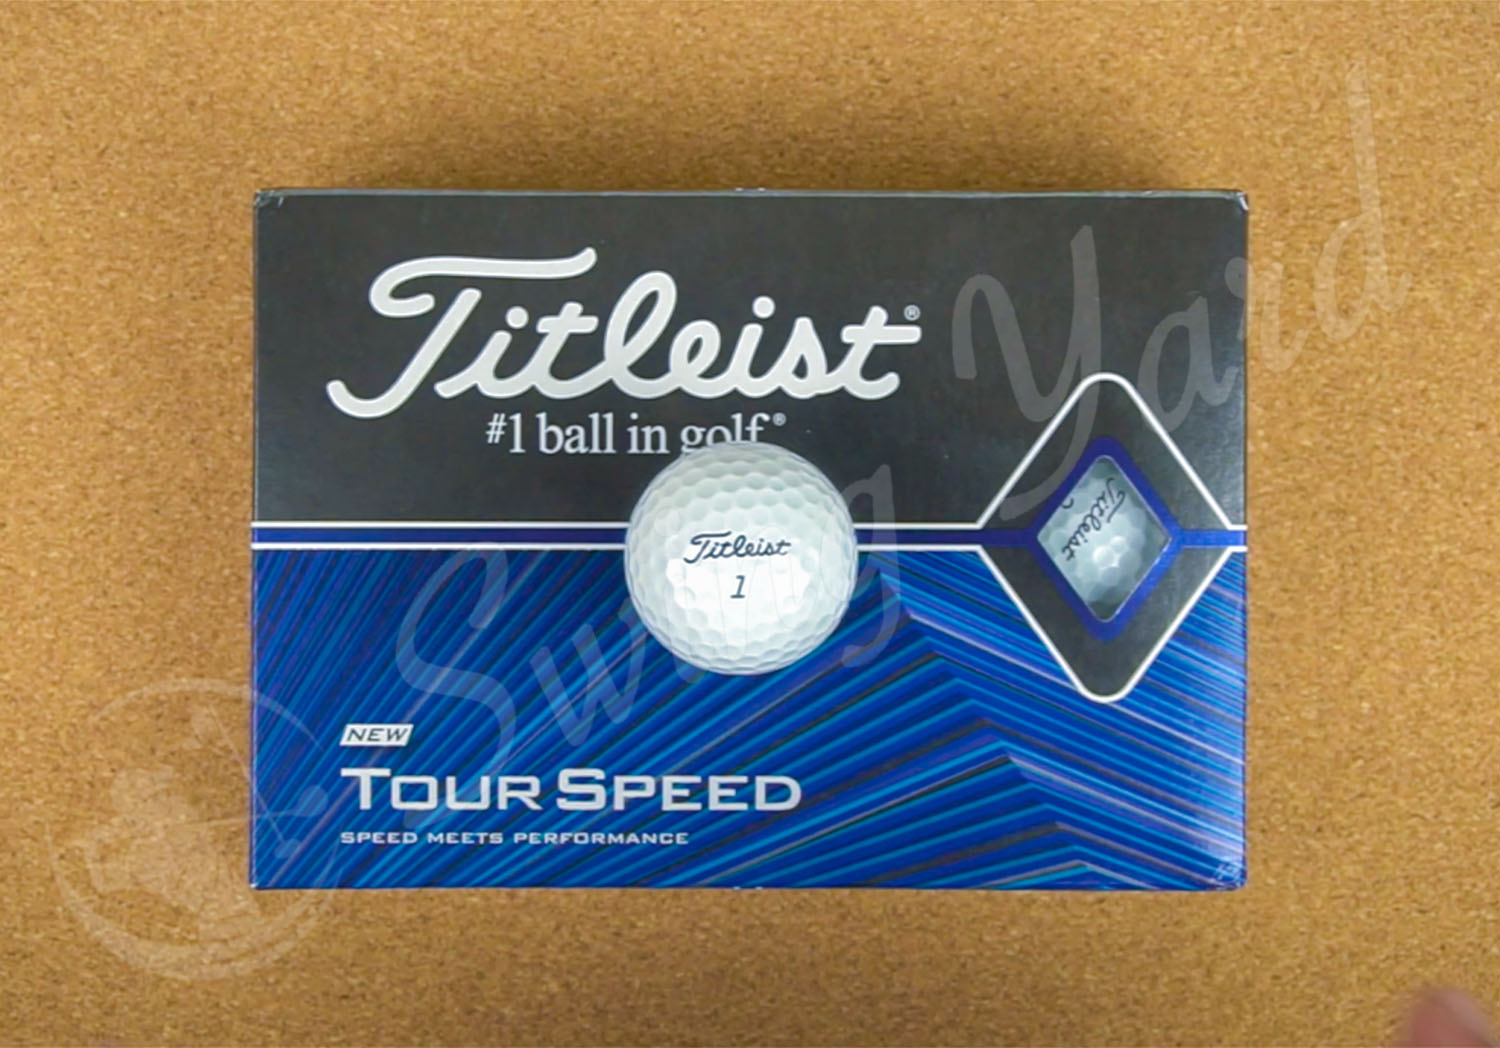 A Titleist Tour Speed box on my table